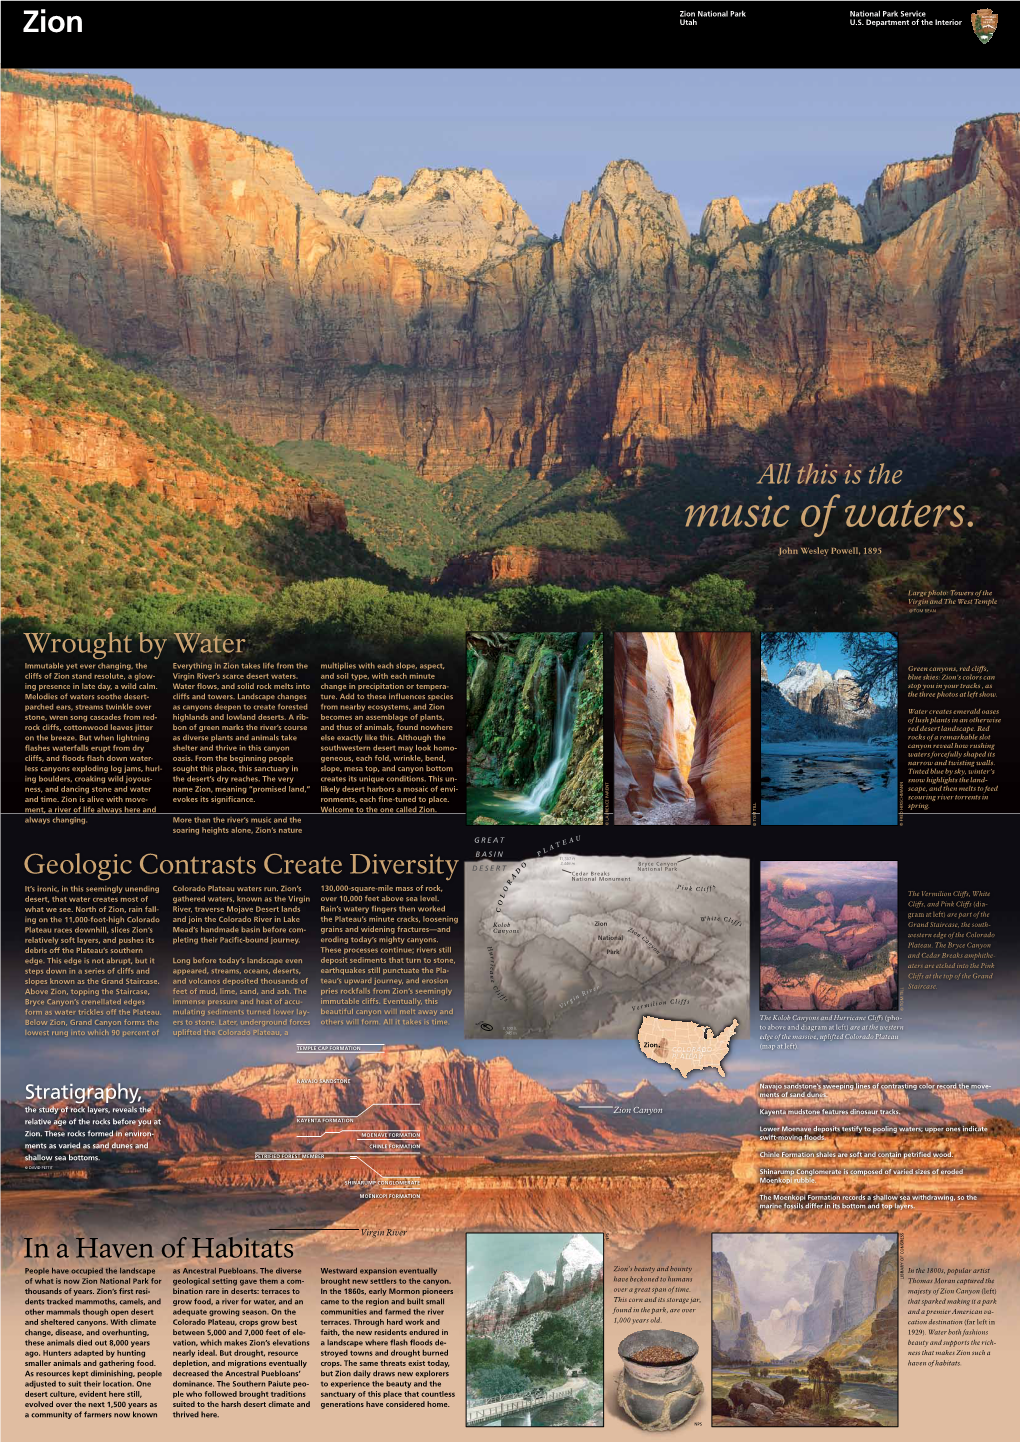 View Zion Park Map Here